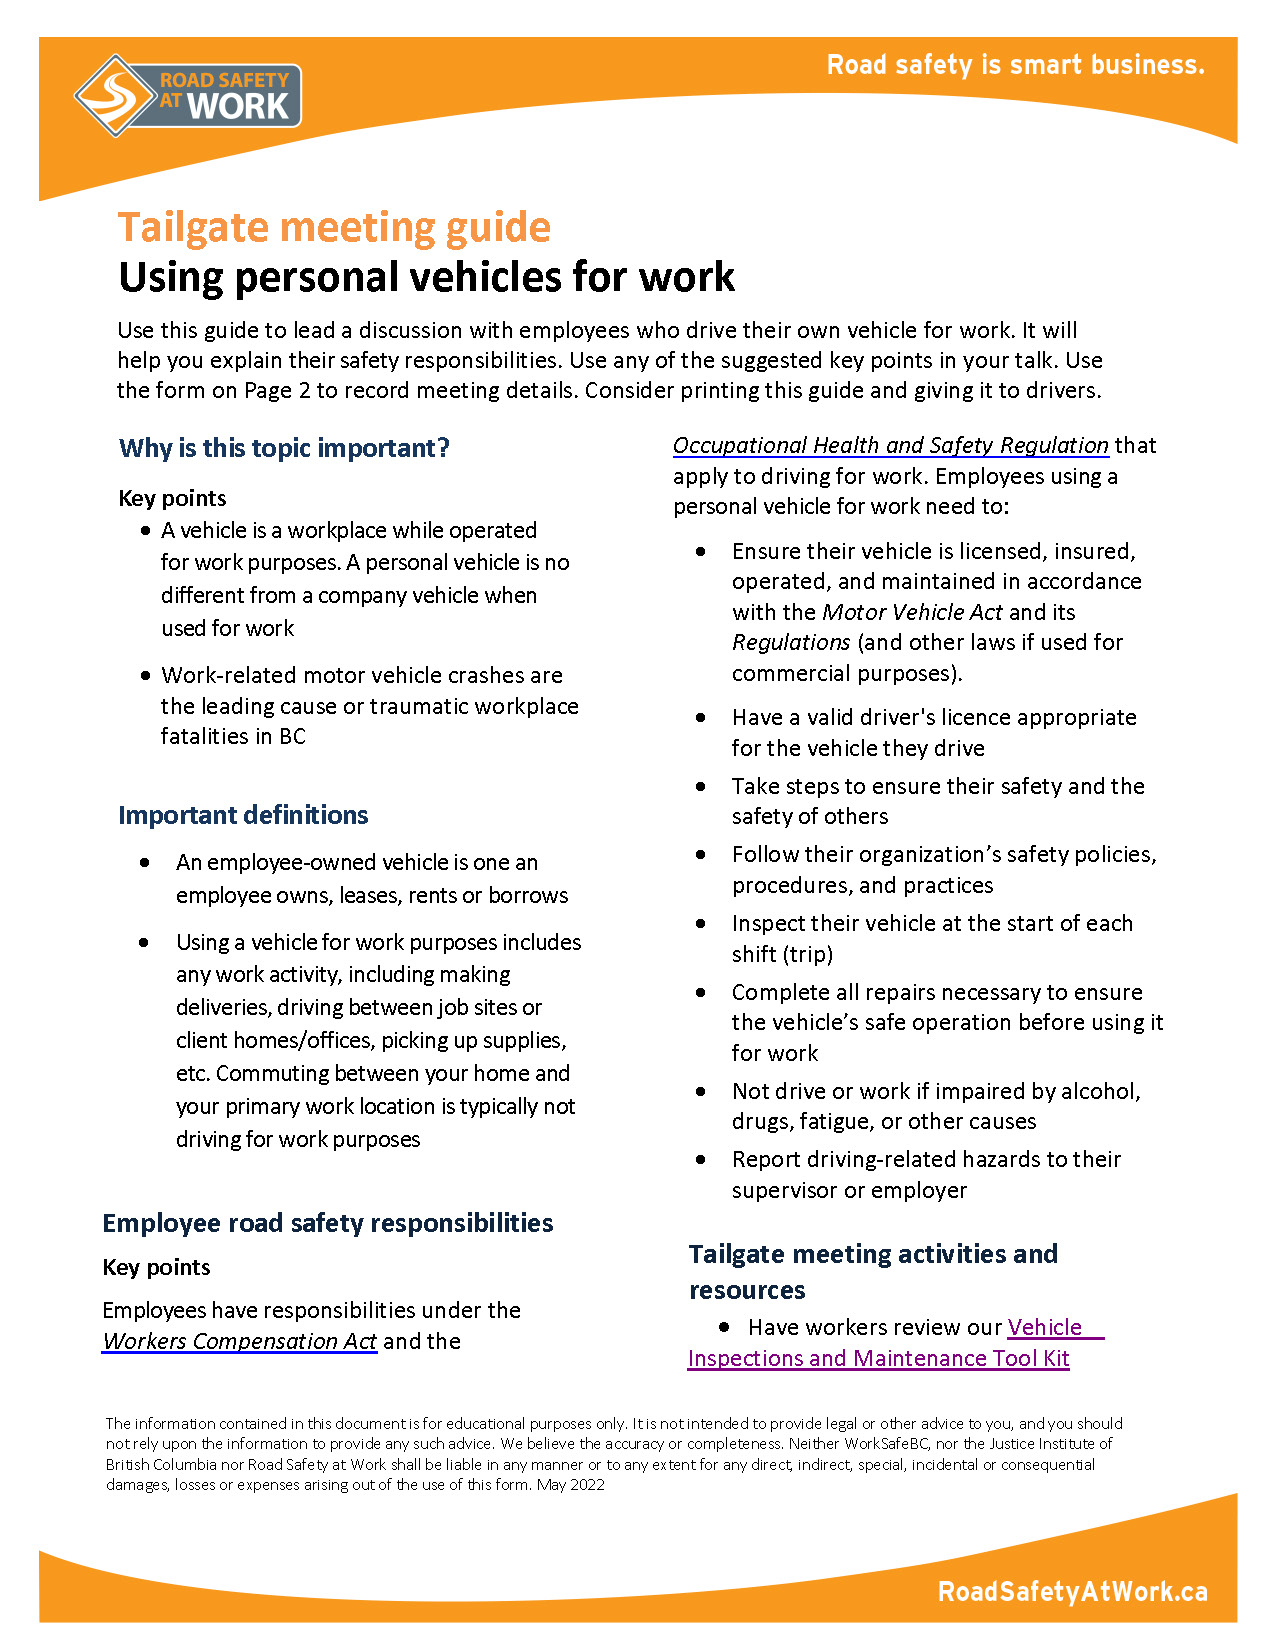 Tailgate meeting guide: Using personal vehicles for work